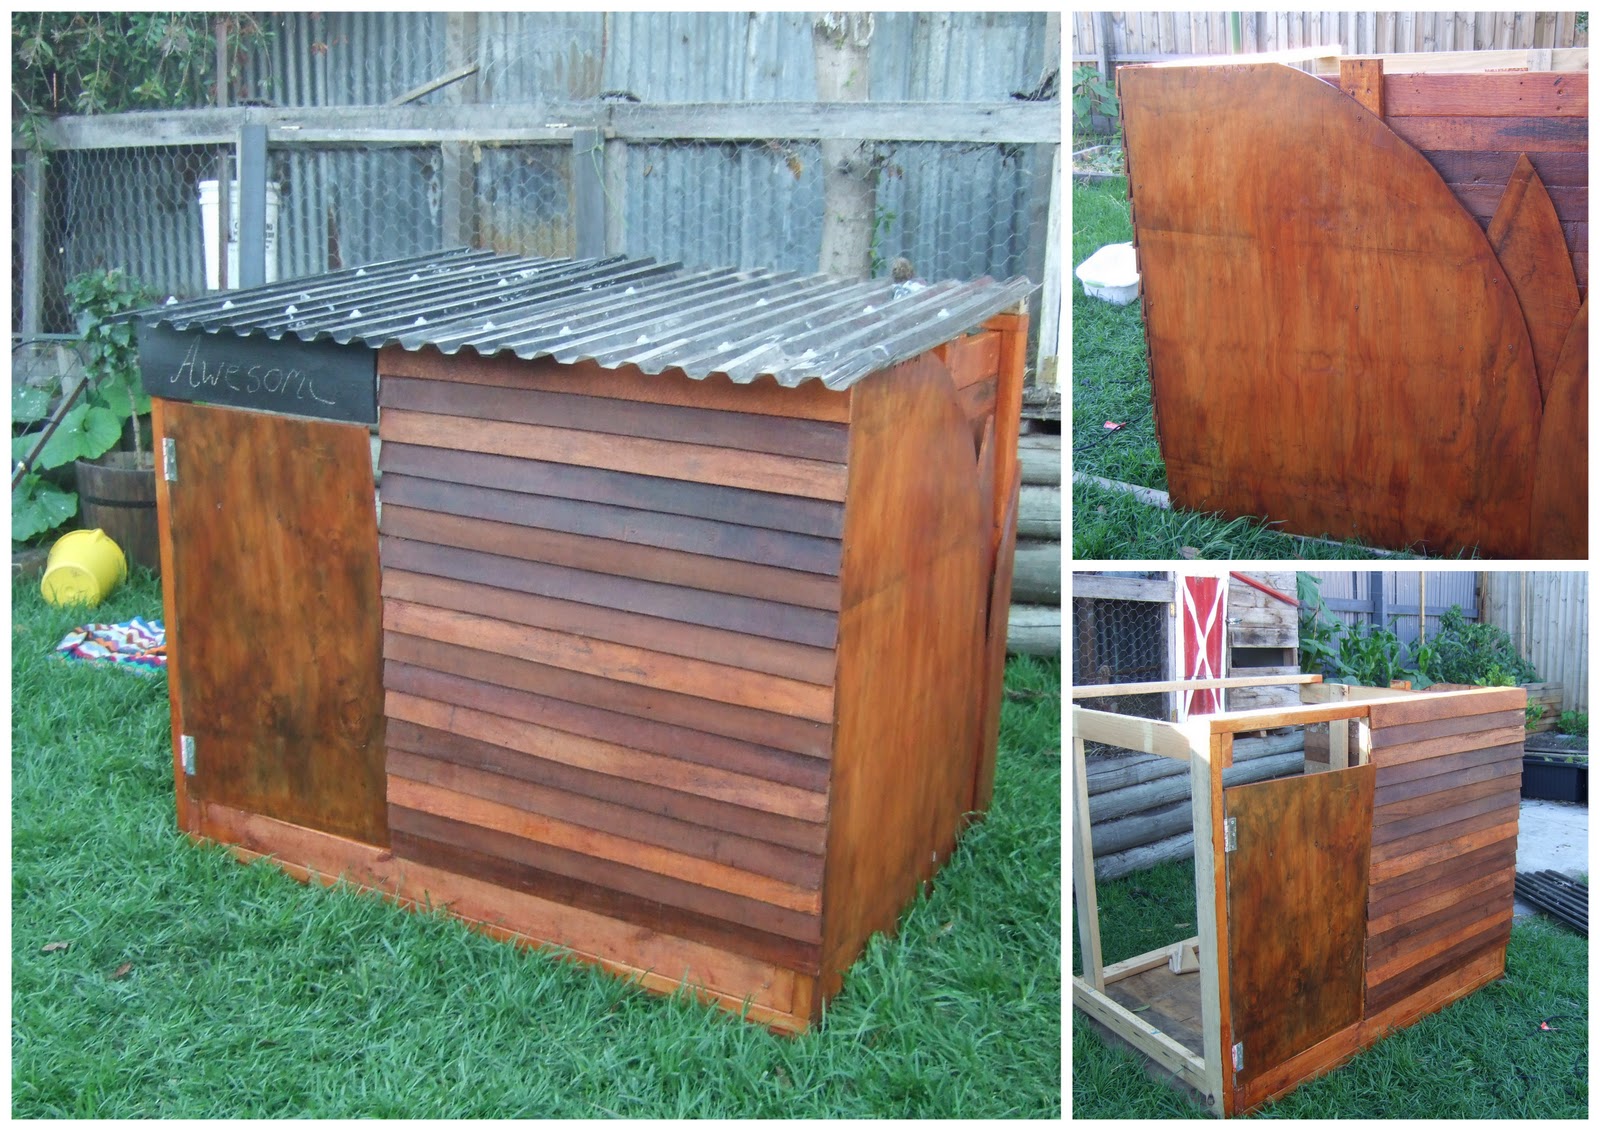 Funkbunny: Re-building the chicken coop #3, day 1